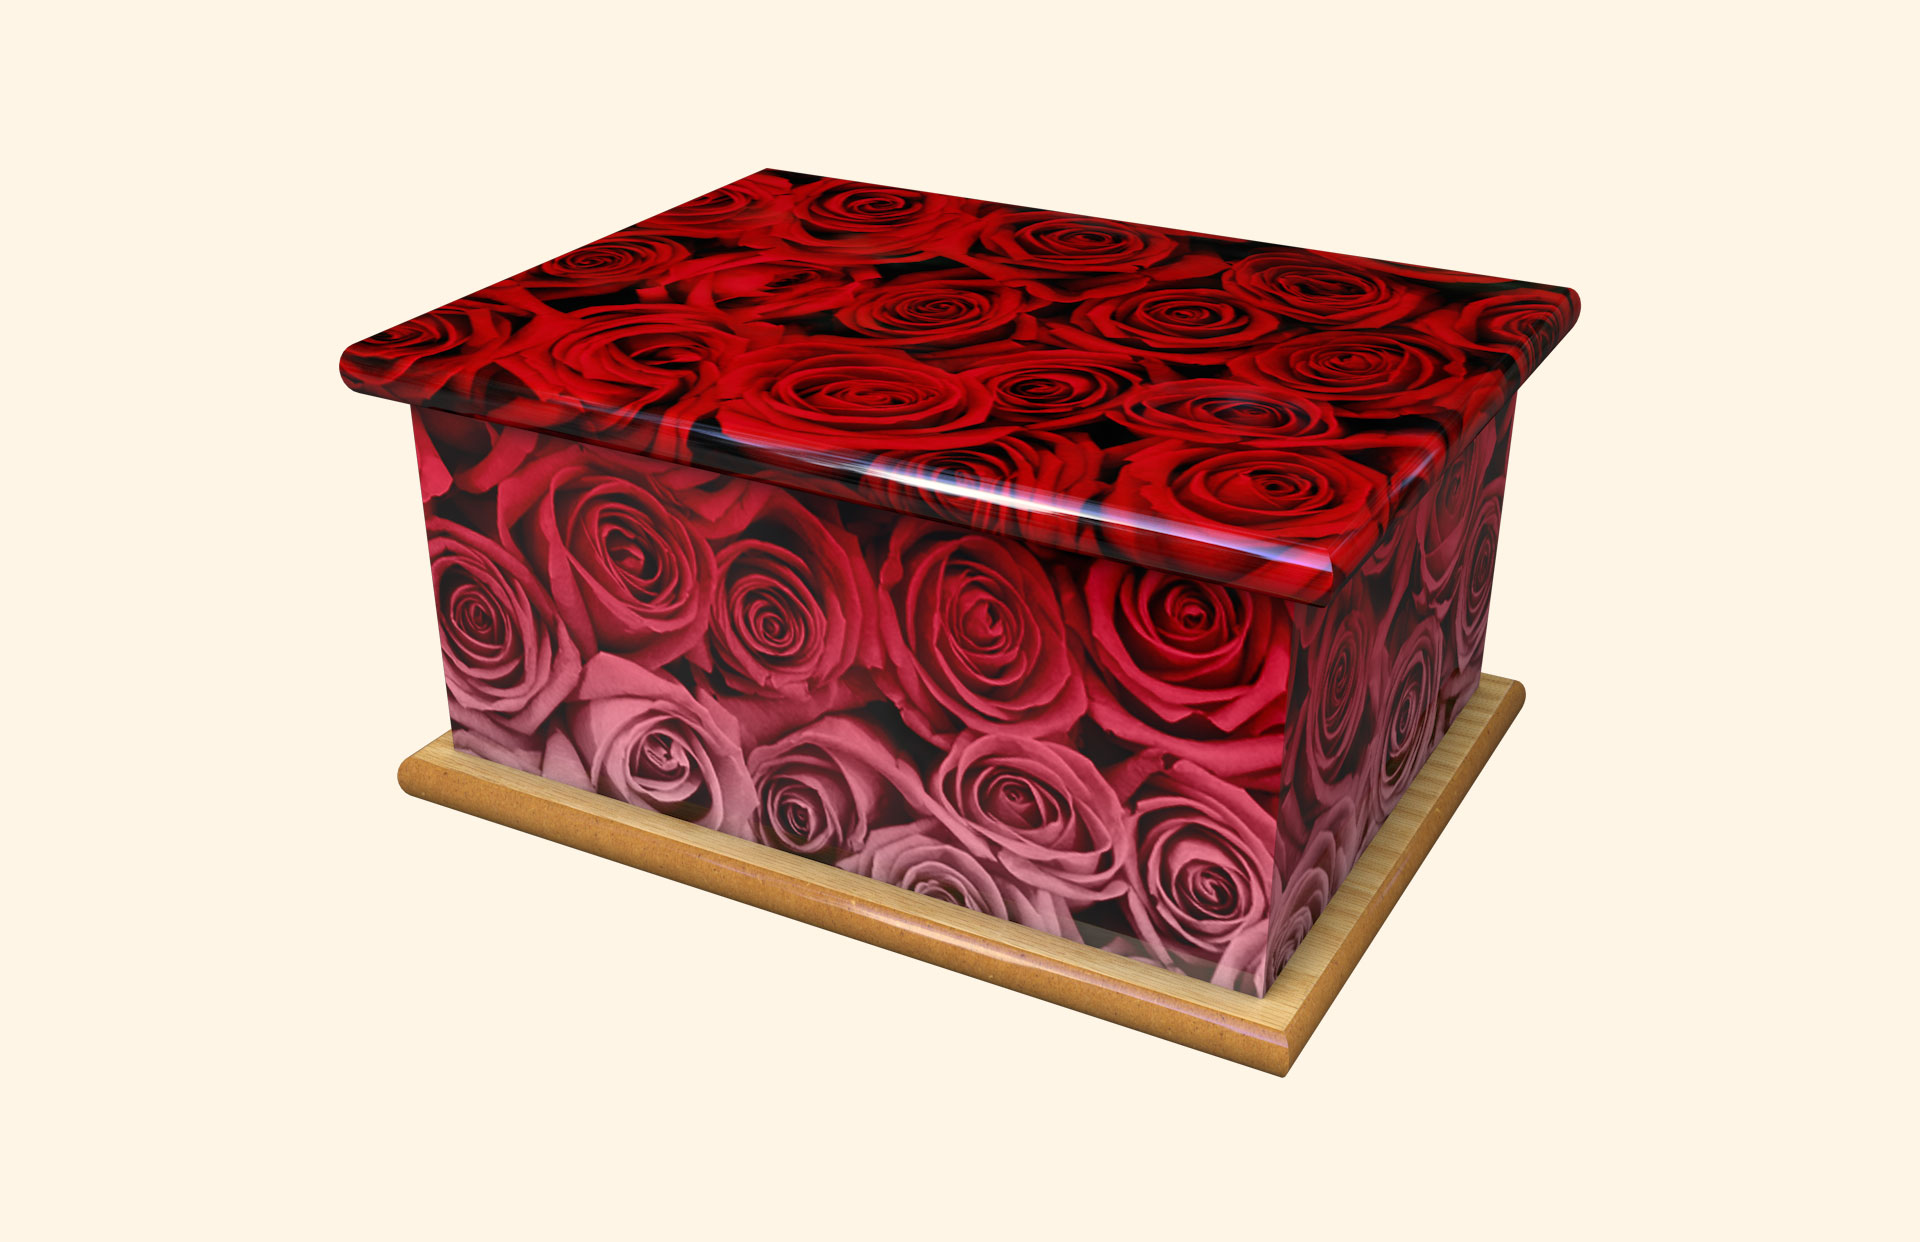 Rows of Roses adult ashes casket